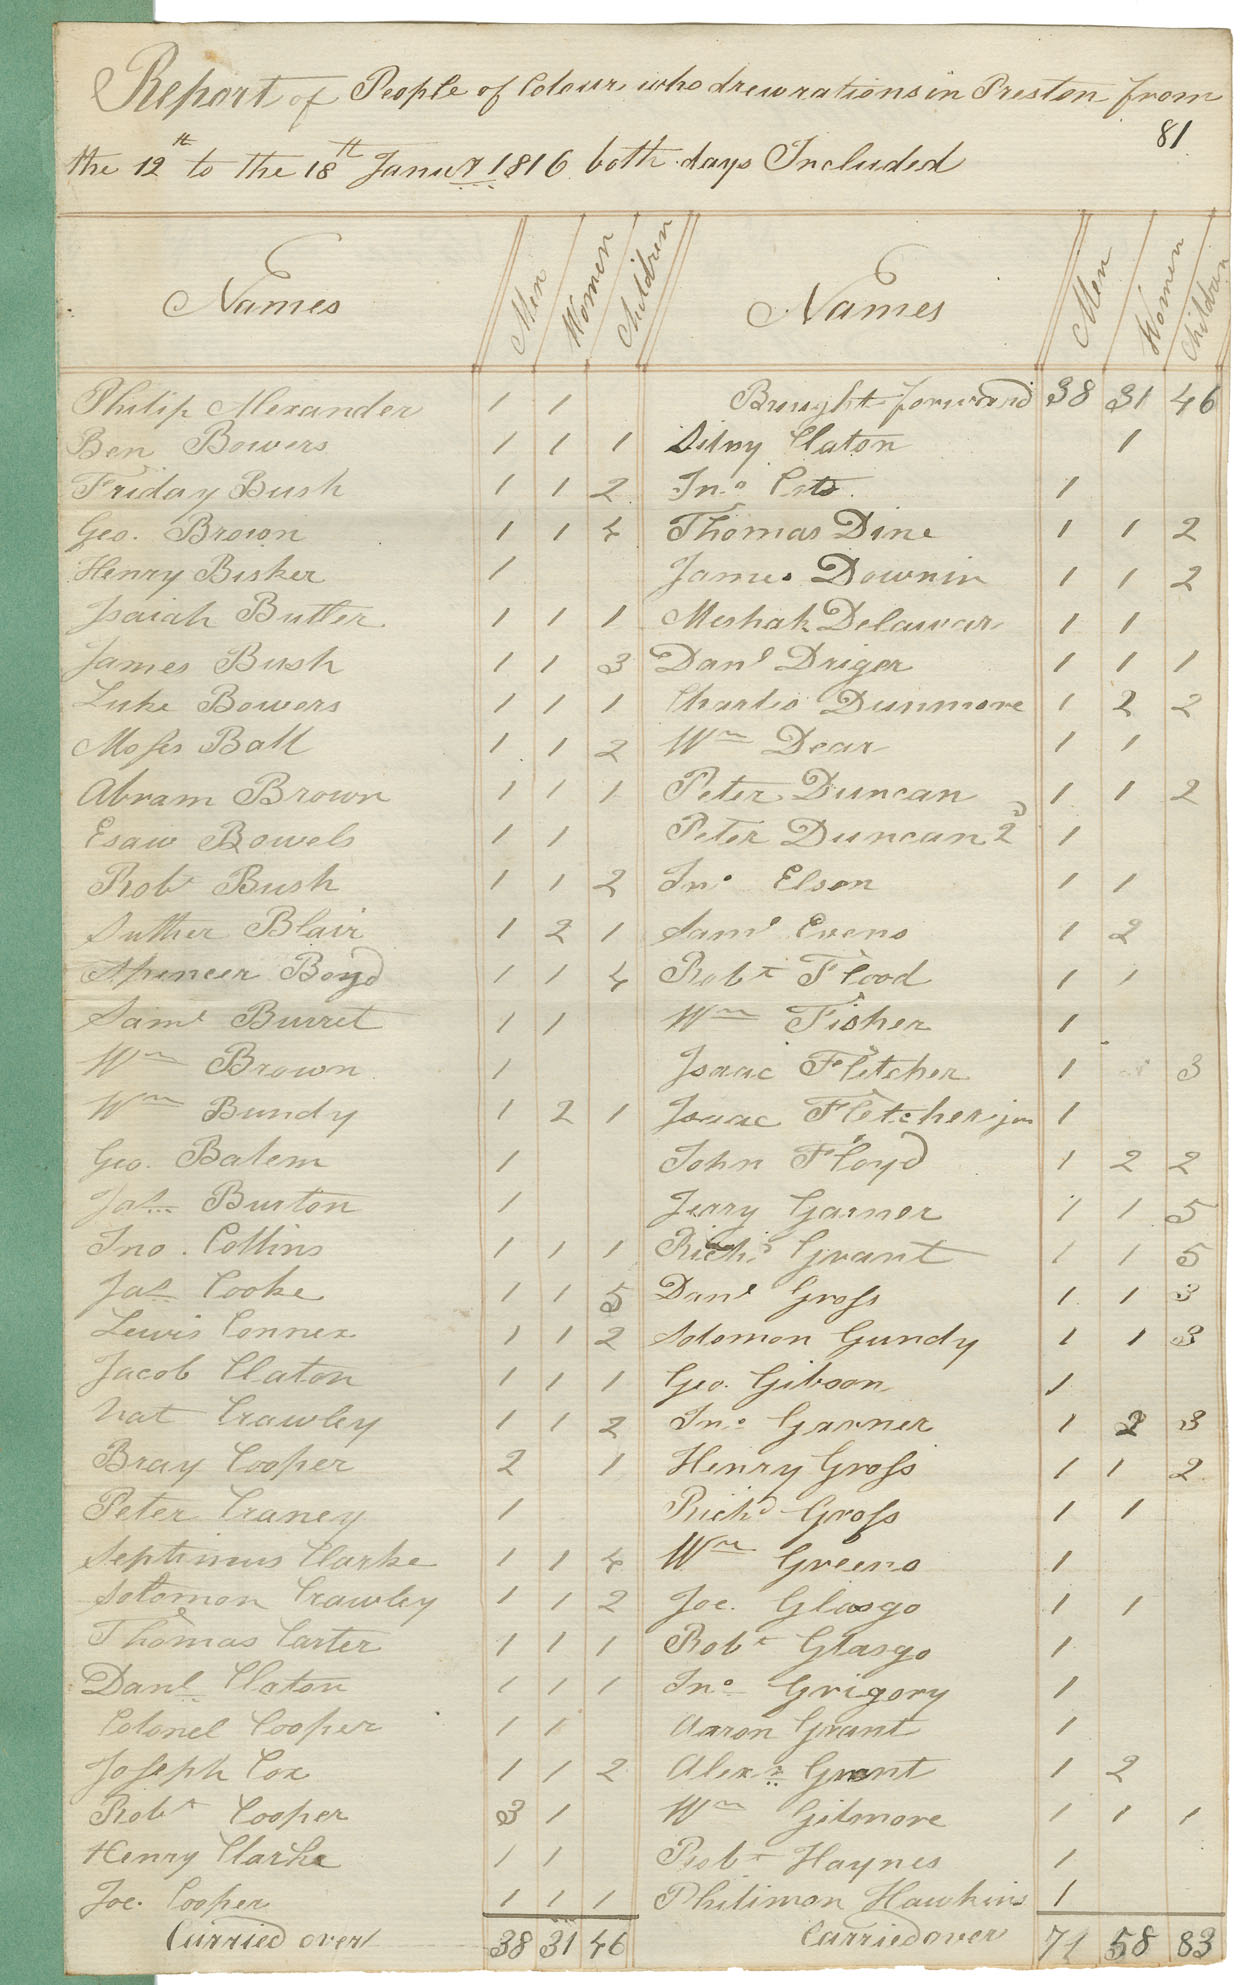 african-heritage : Weekly ration reports, Preston, from 5 January to 1 August 1816